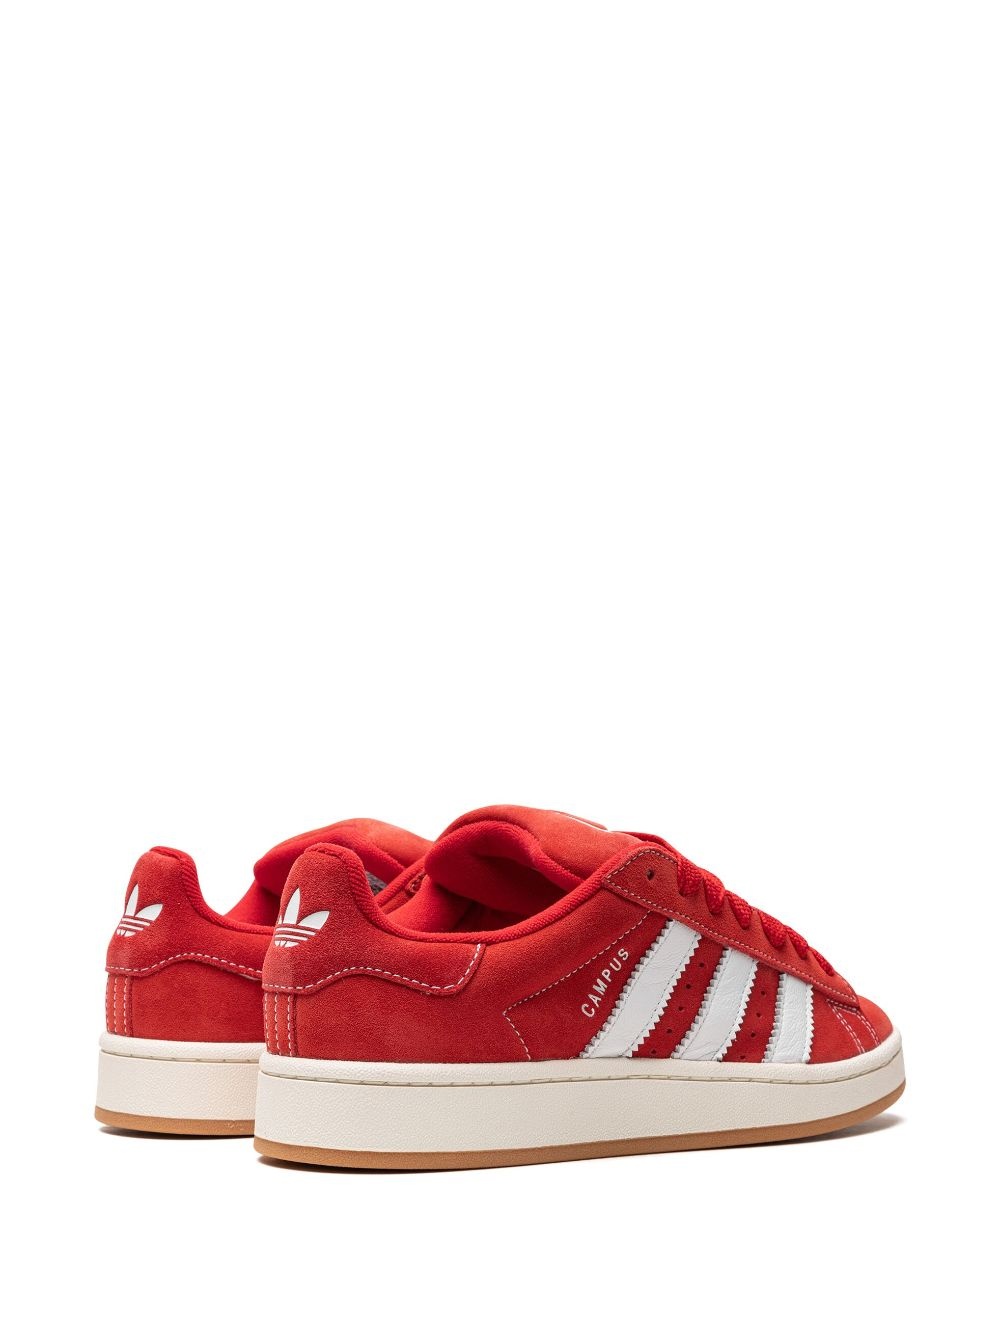 Campus 00s "Better Scarlet/Cloud White" sneakers - 3